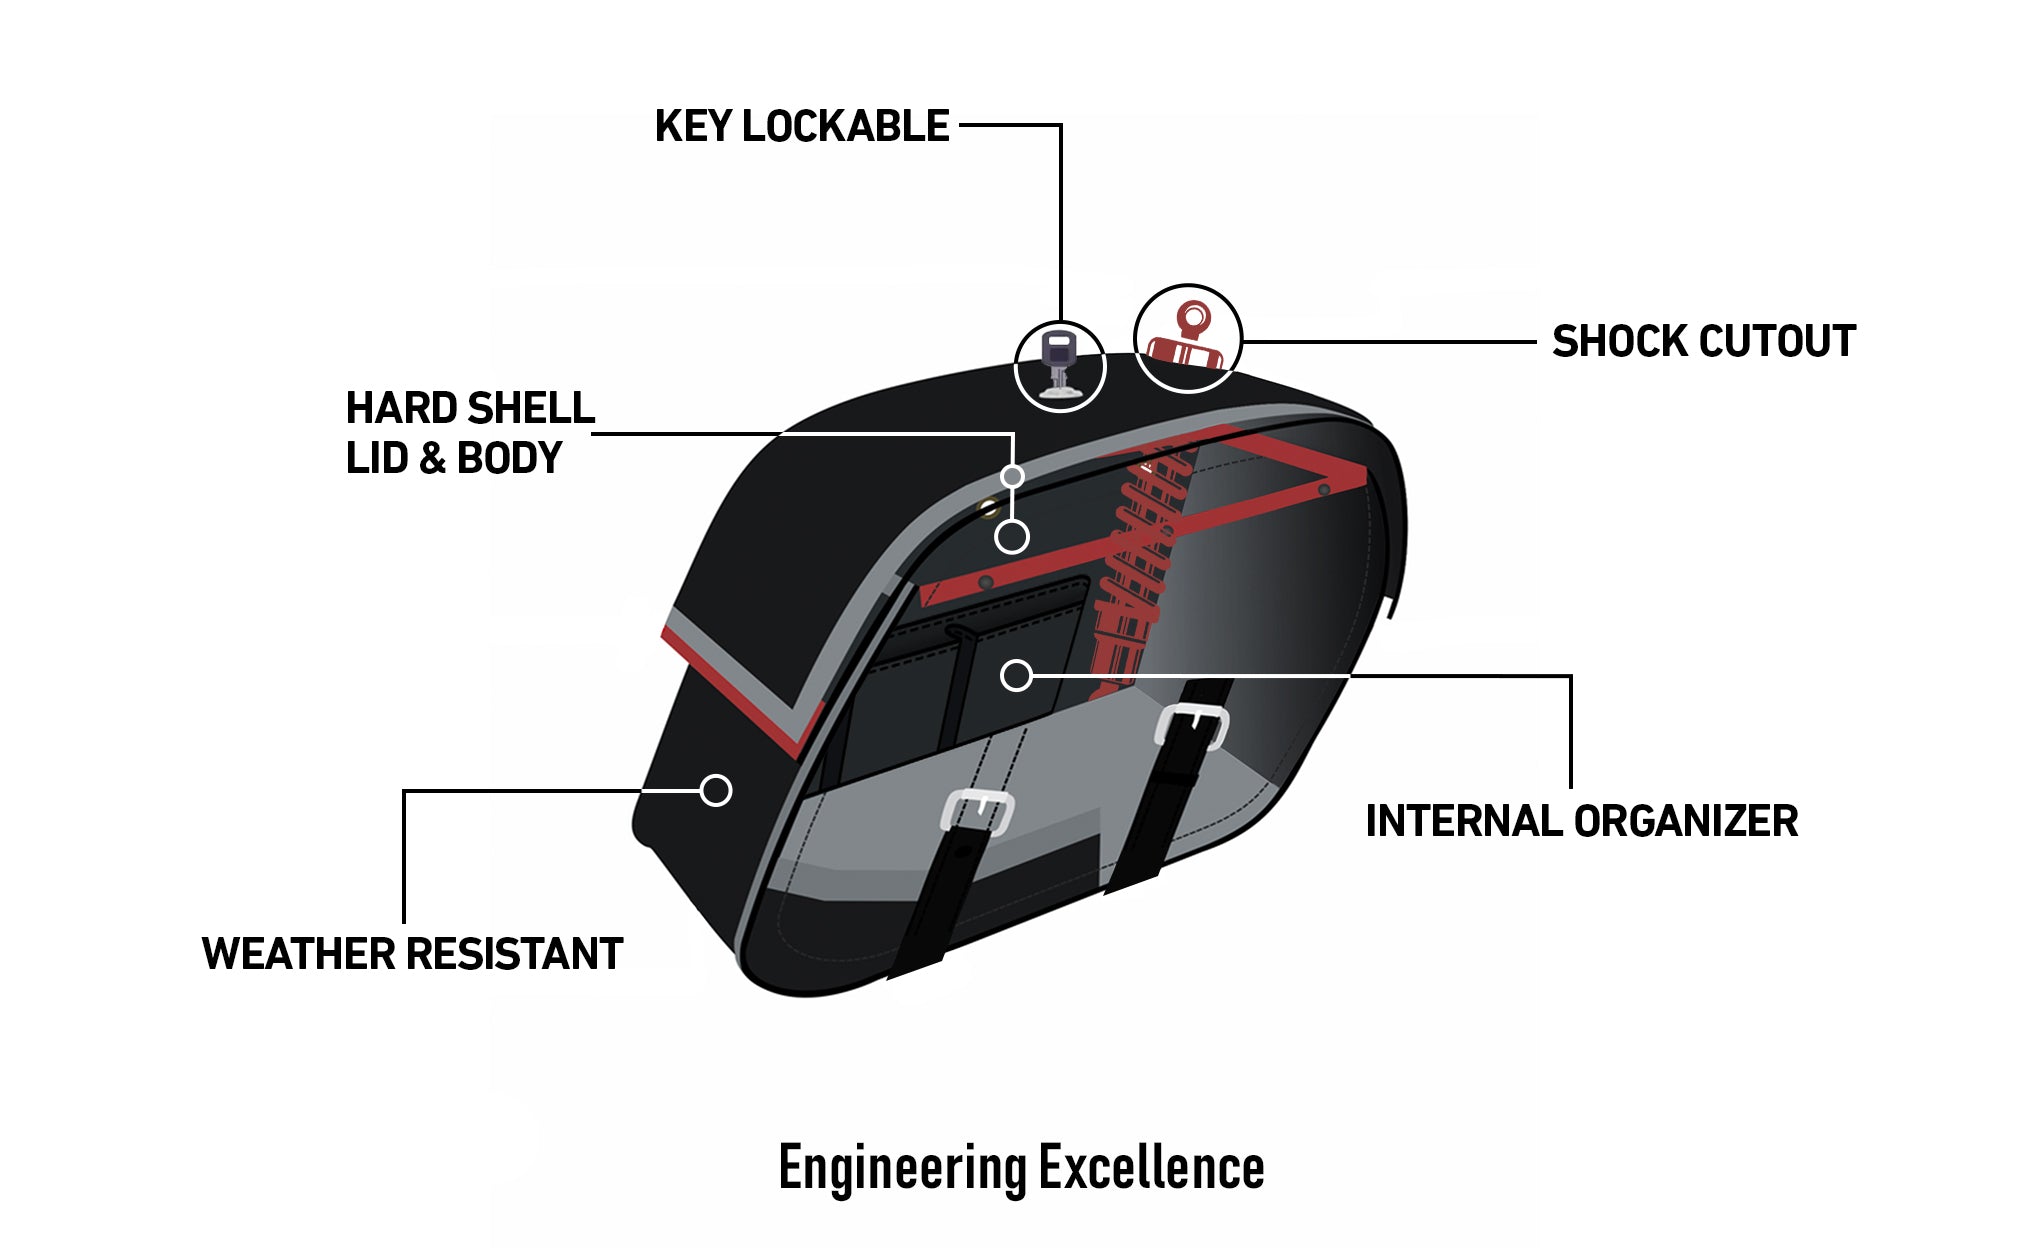 Viking Raven Extra Large Hyosung Aquila Gv 250 Shock Cut Out Leather Motorcycle Saddlebags Engineering Excellence with Bag on Bike @expand